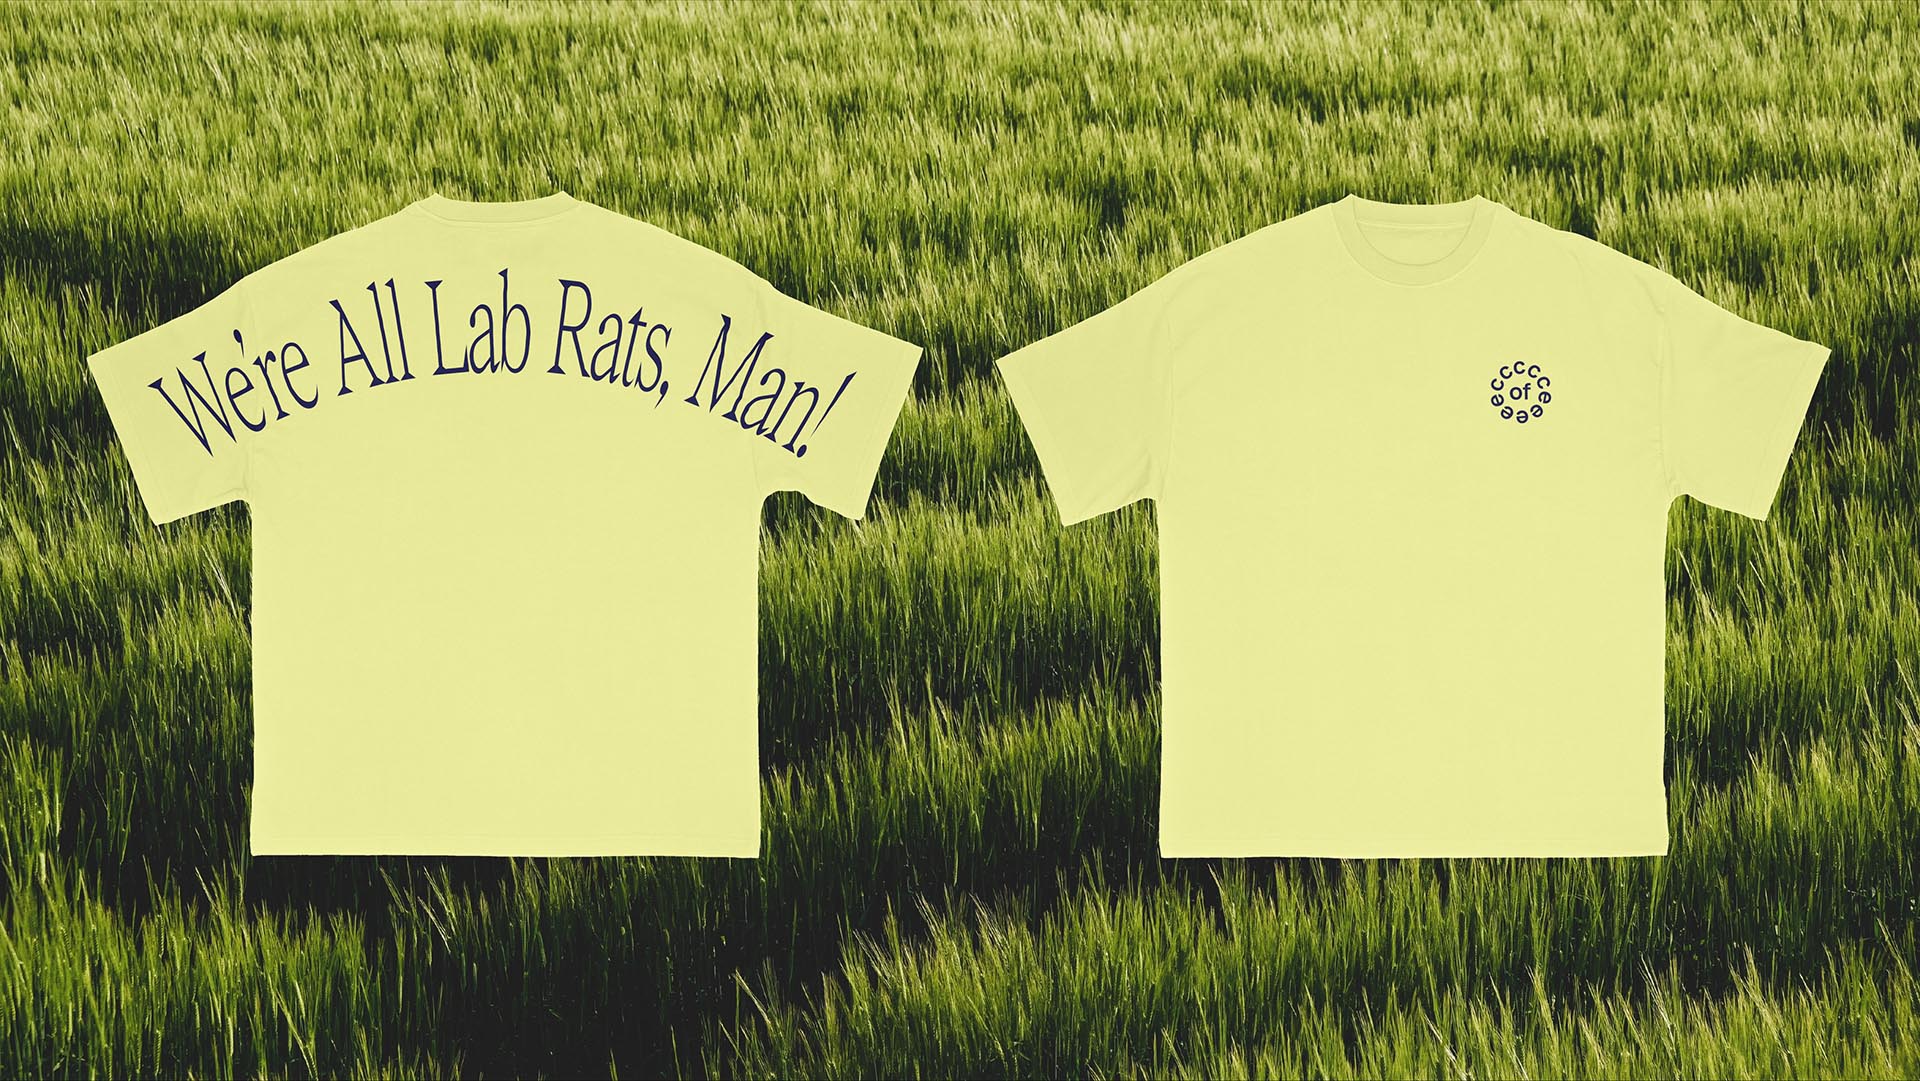 Children of Earth T-shirt “We’re All Lab Rats Man!”